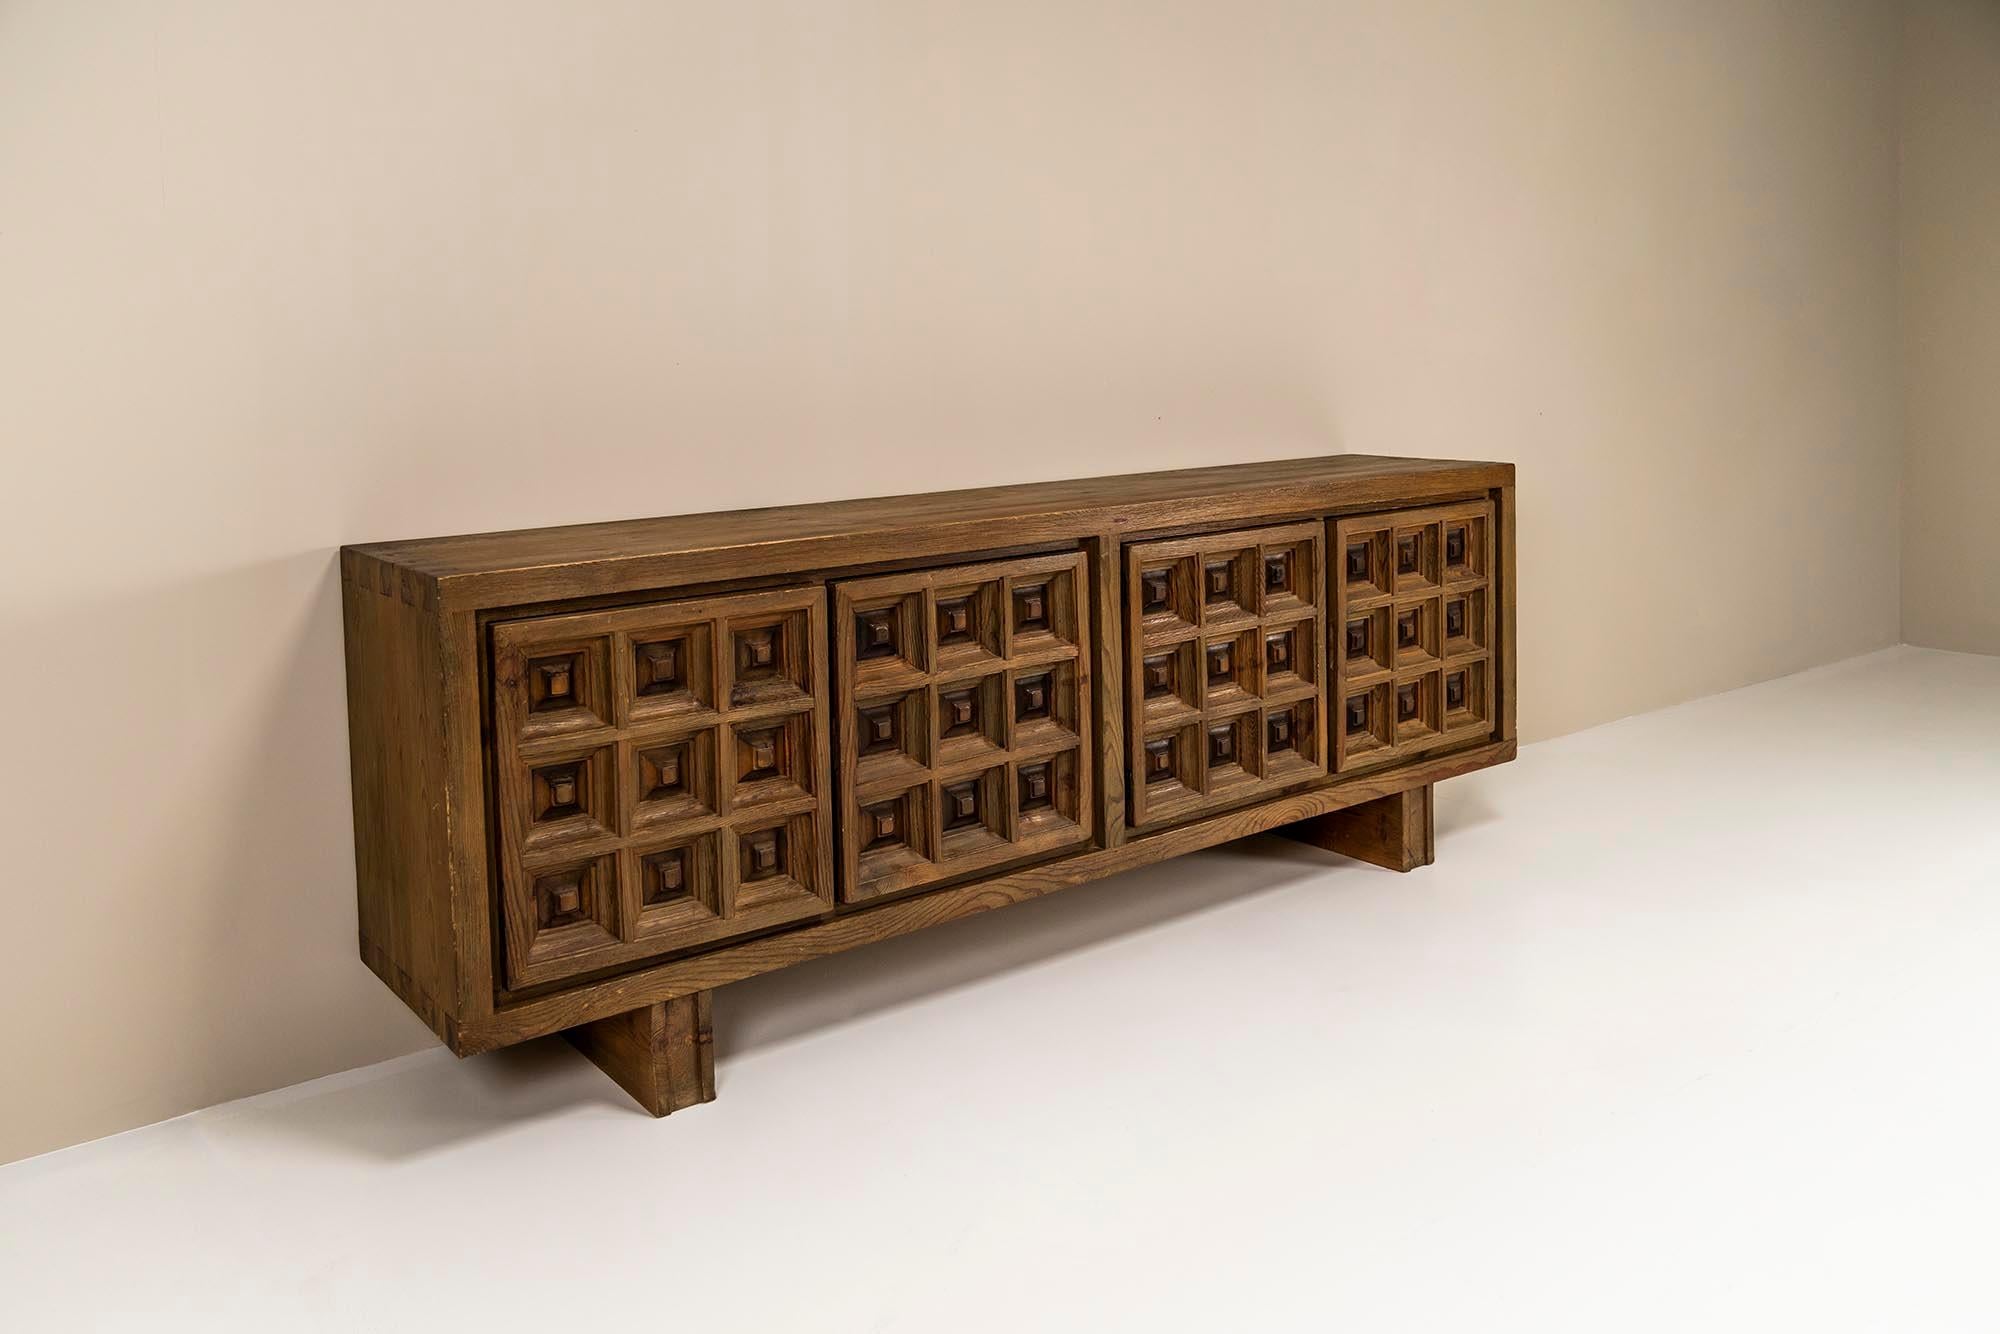 Spanish Biosca Sideboard in Stained Pine, Spain 1960s For Sale